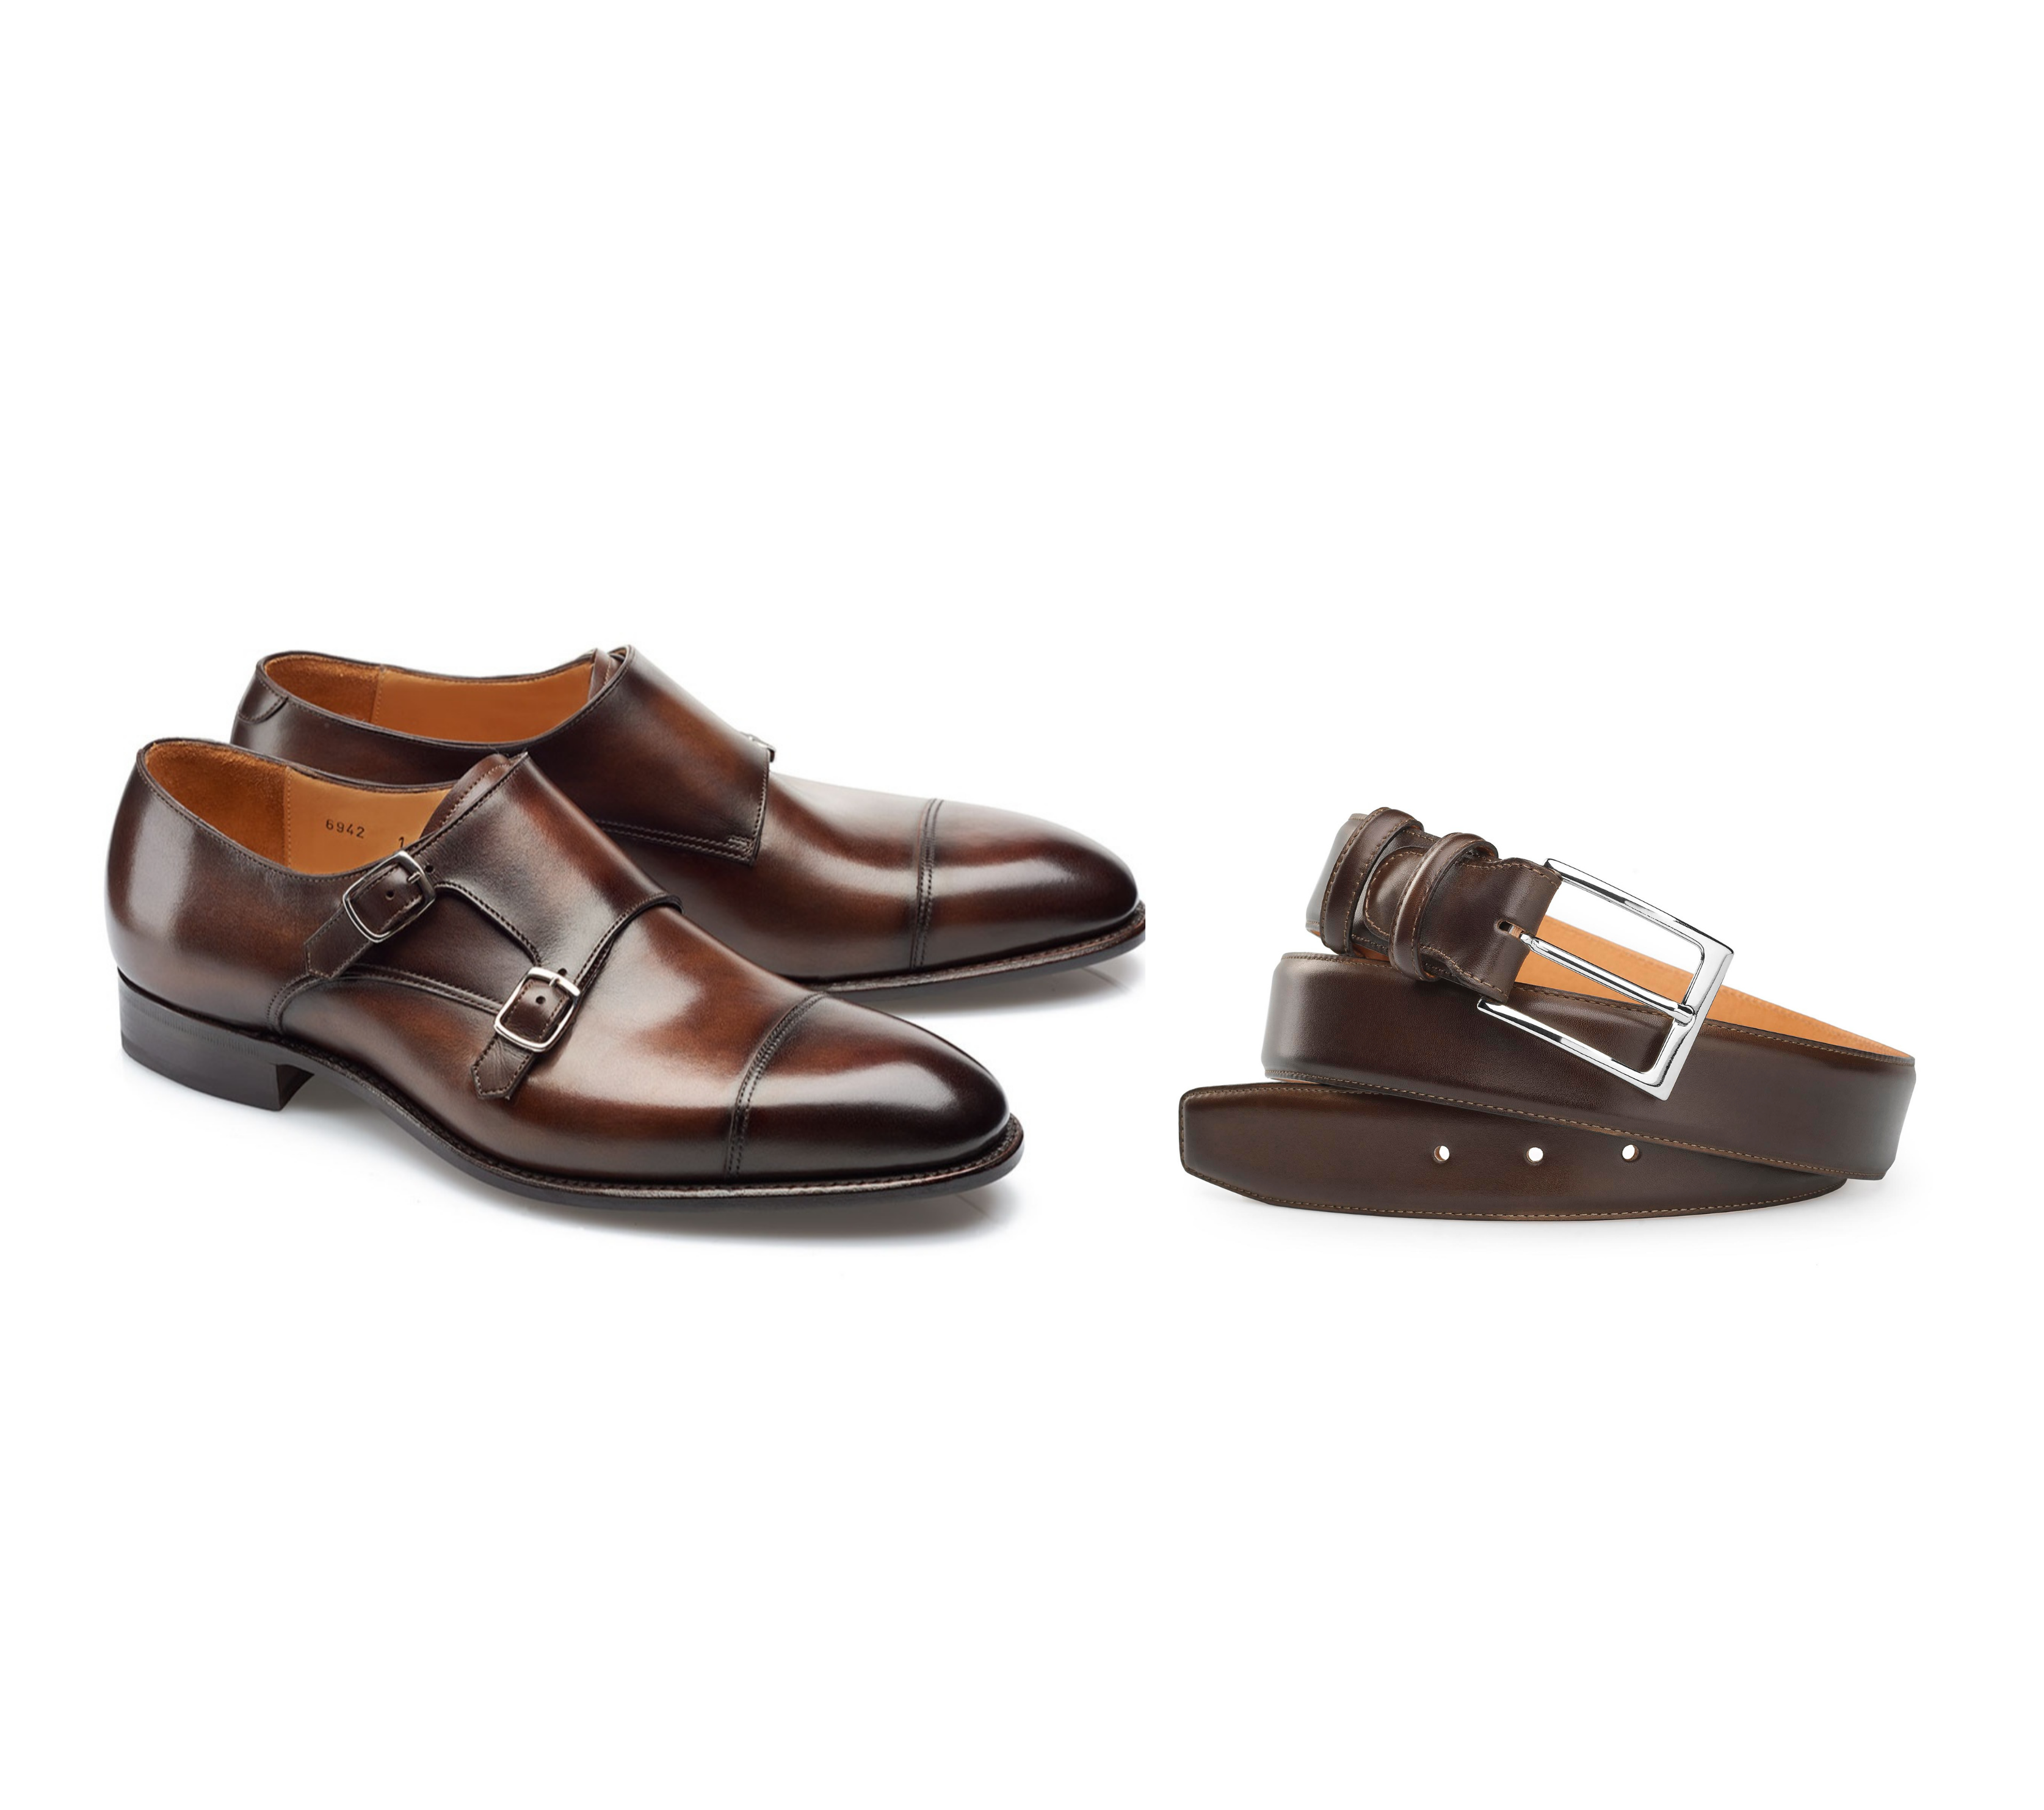 Double Buckle Shoes - Leather - PM Andrew Coimbra